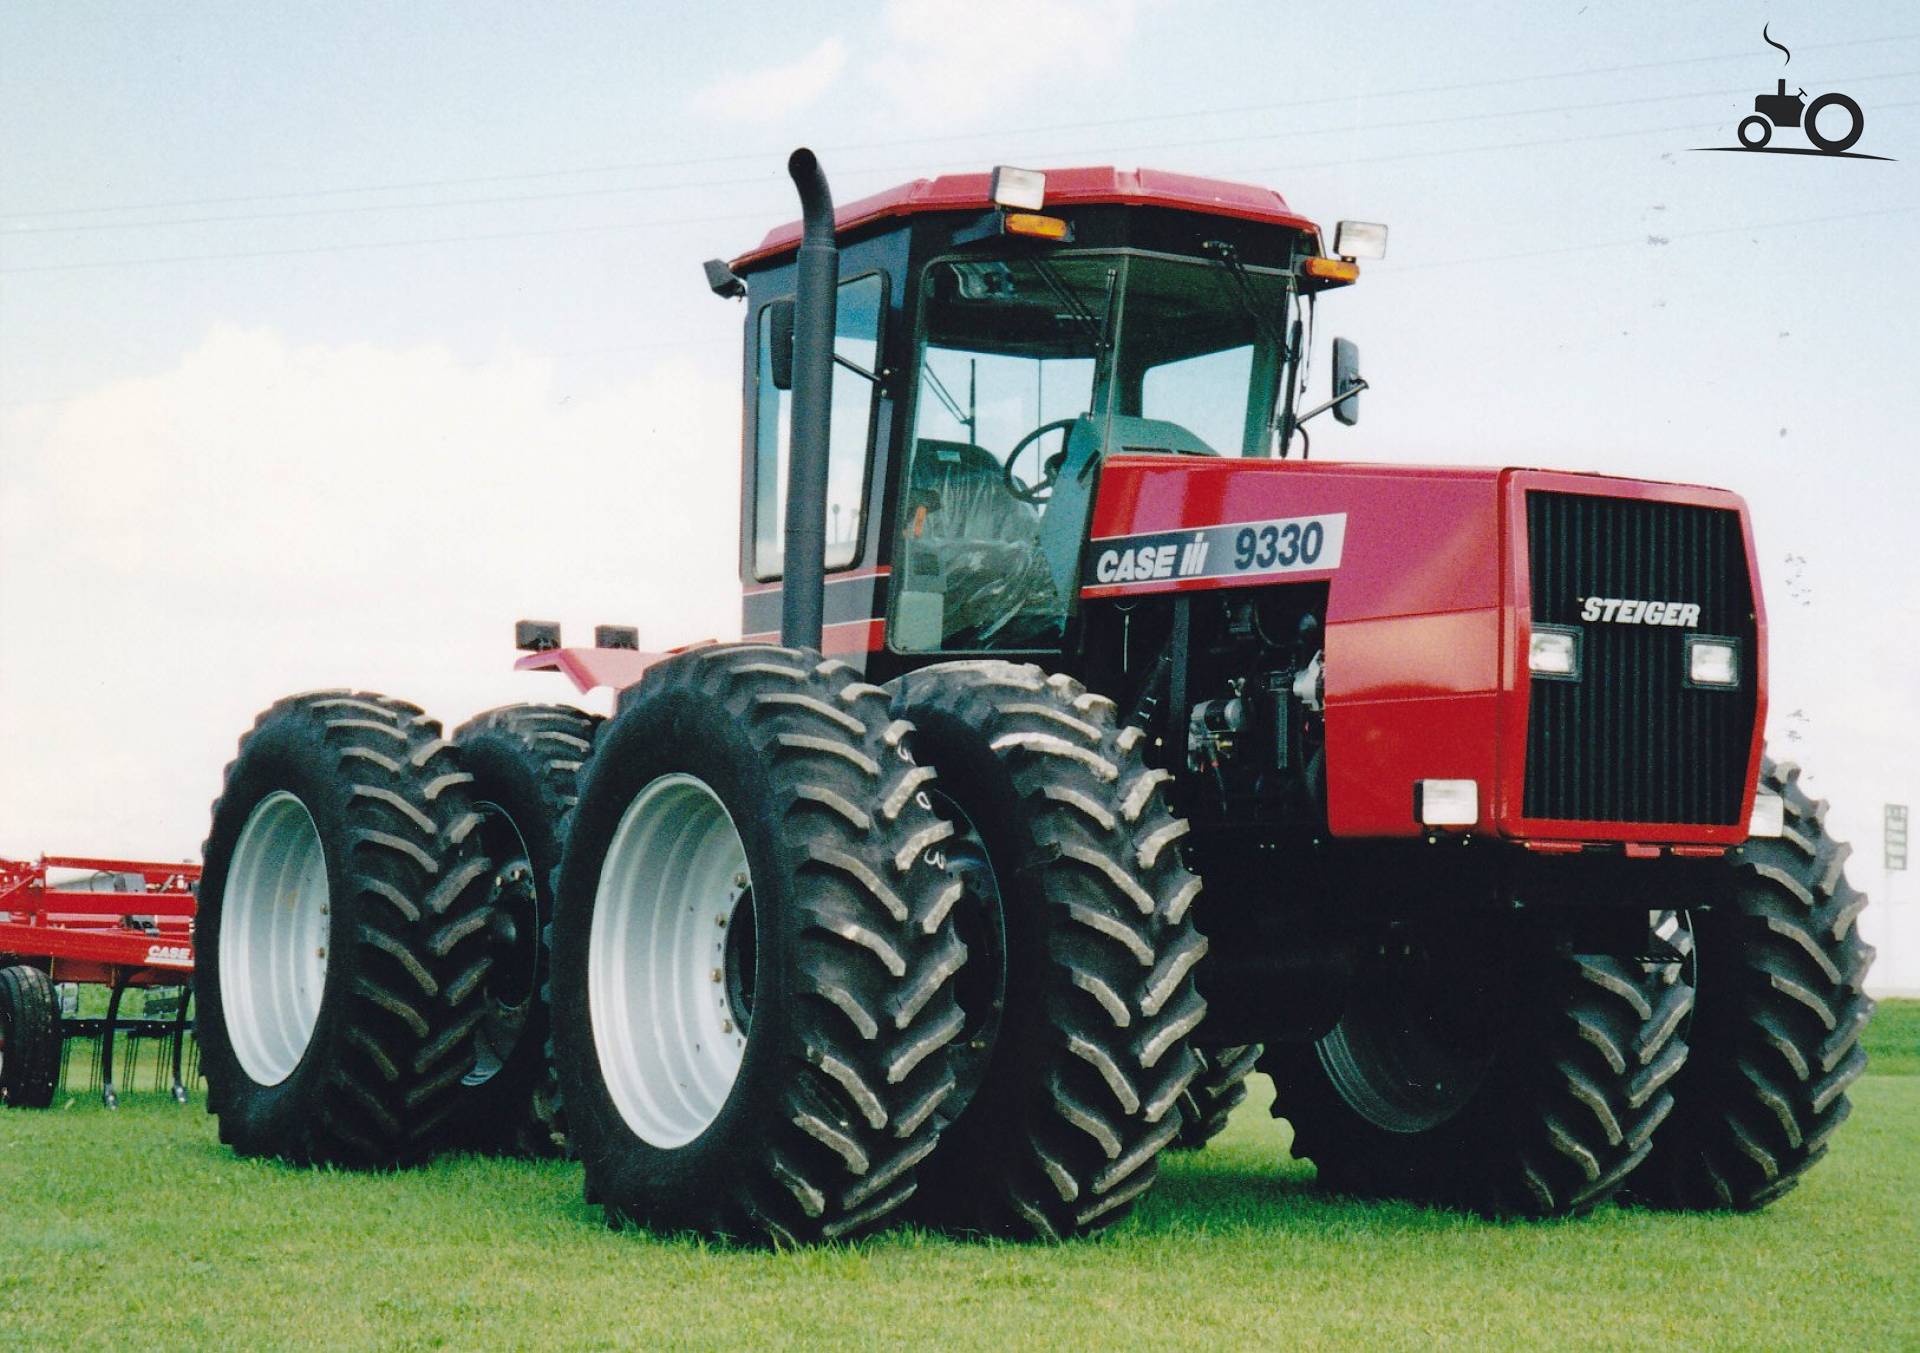 Case IH Steiger 9330 Specs and data - Everything about the Case IH ...